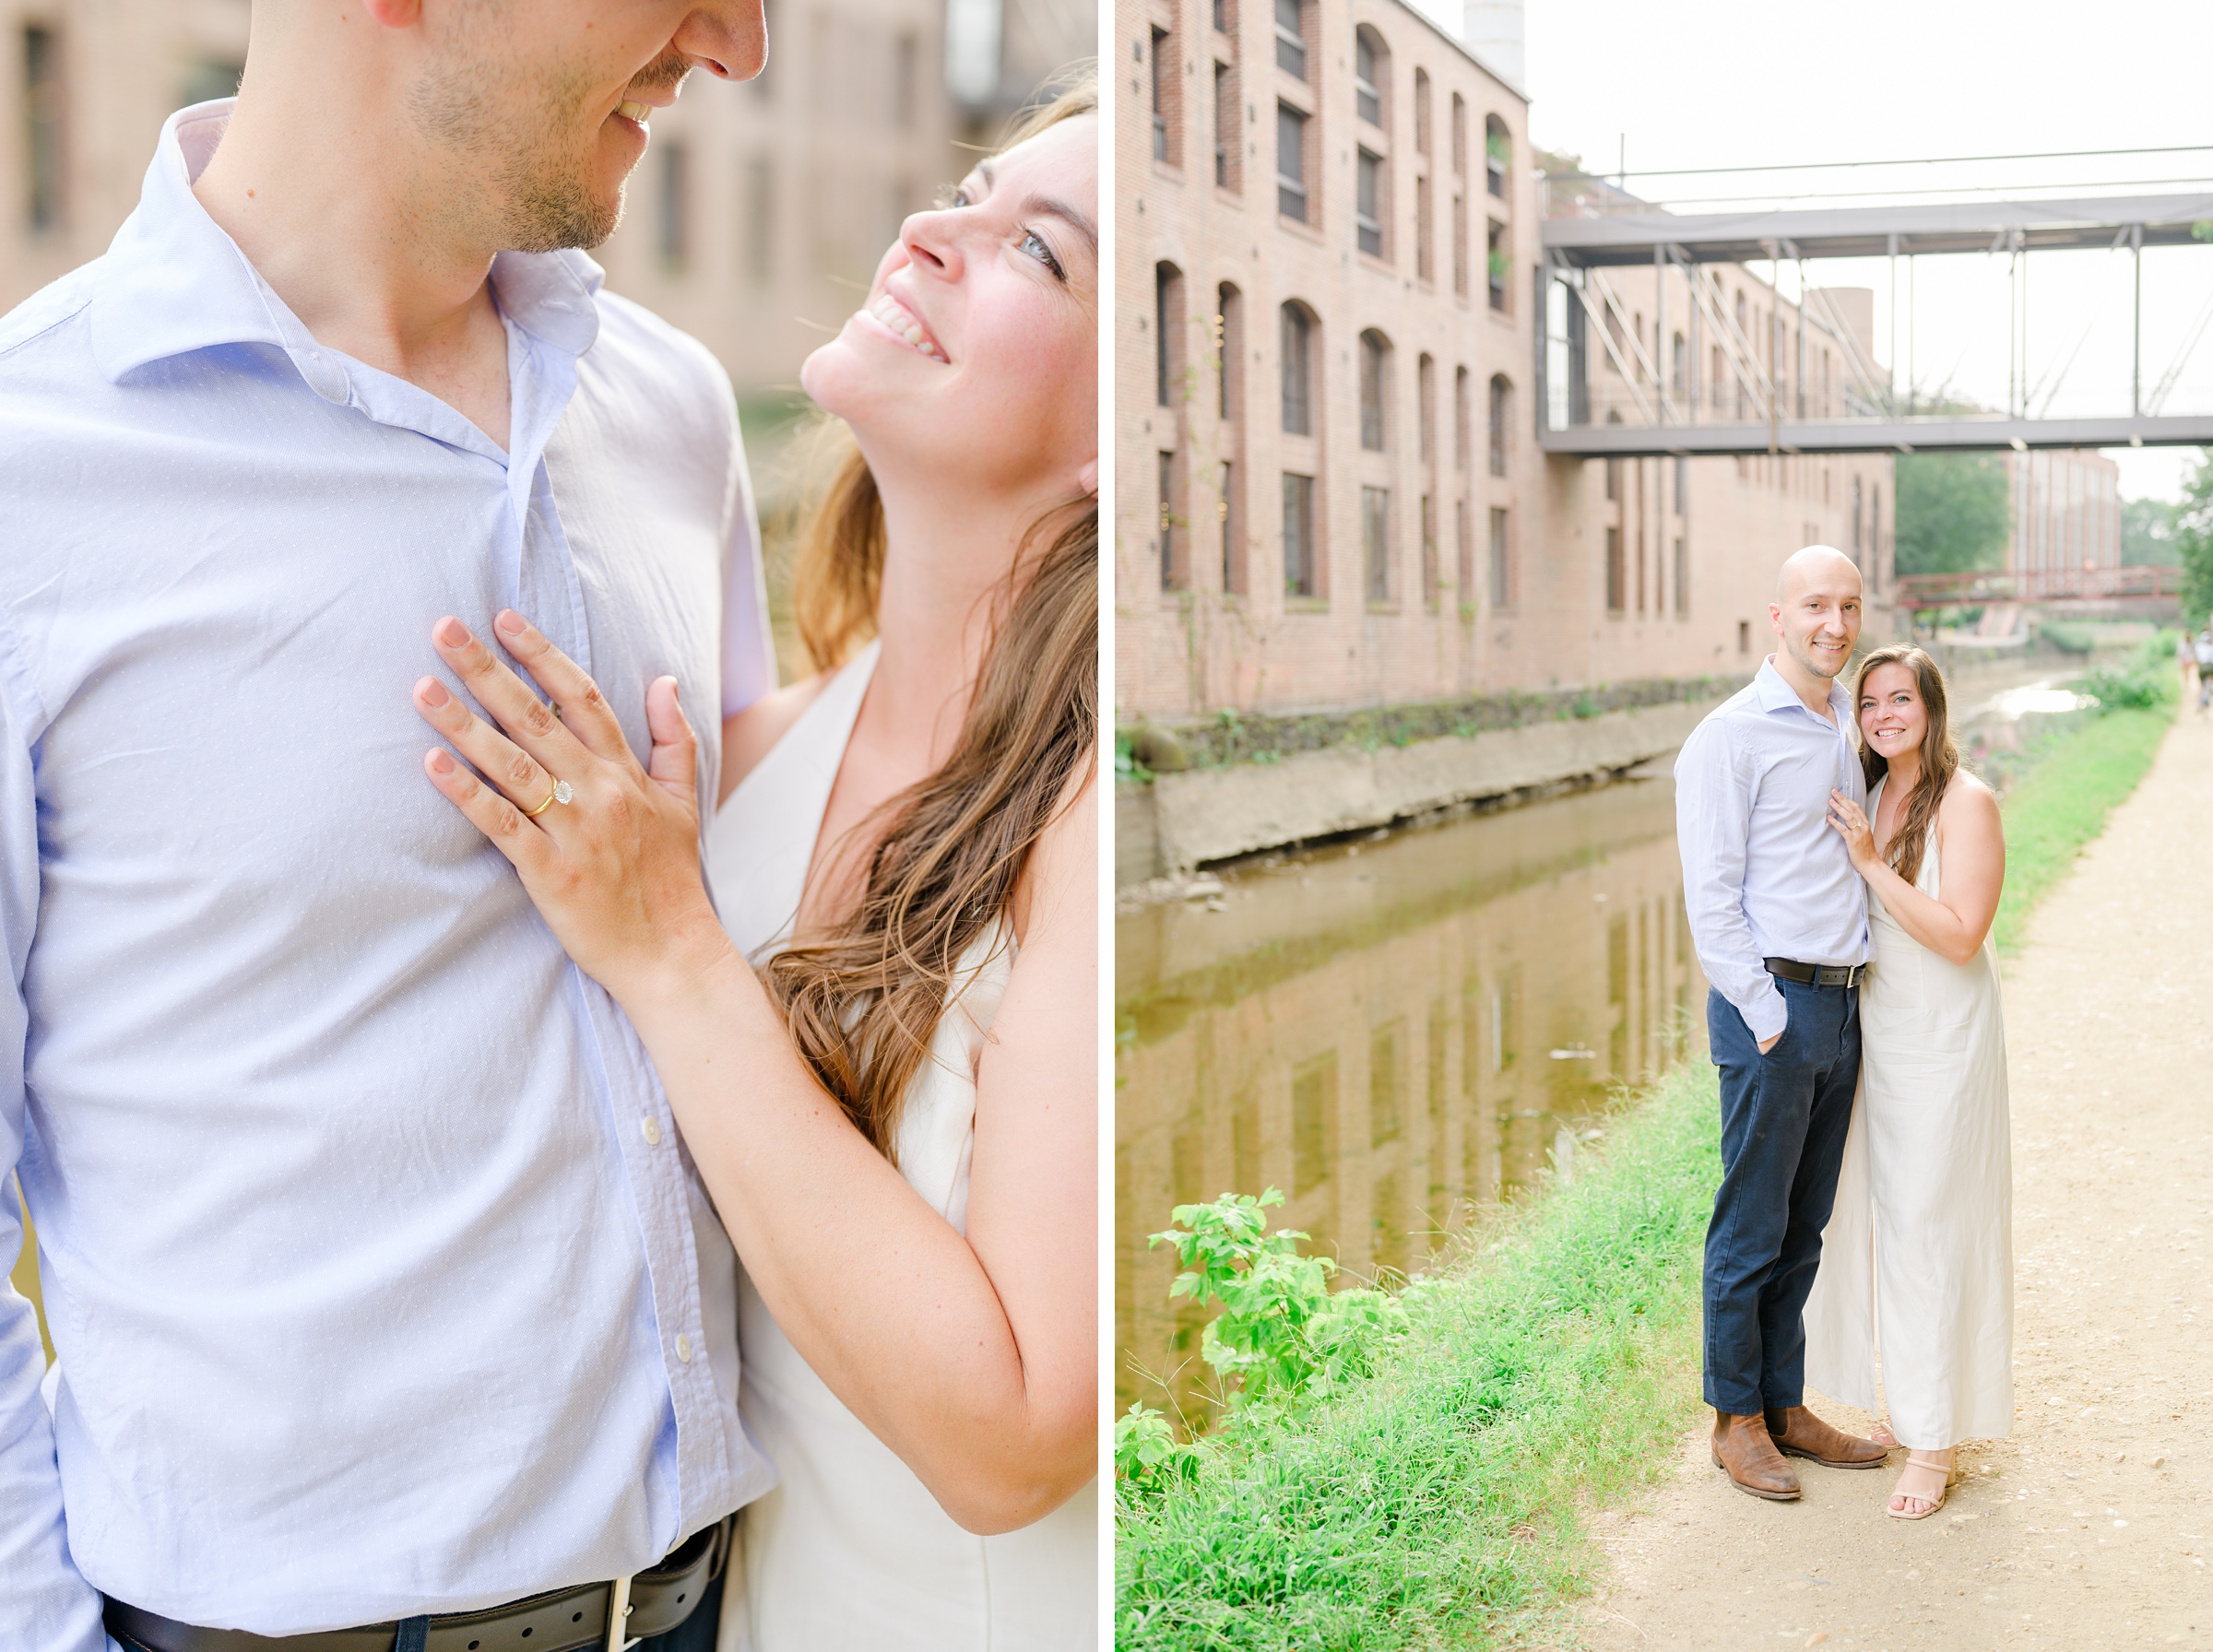 Engaged coupled at the Georgetown Canal for their summer engagement session photographed by Baltimore Wedding Photographer Cait Kramer.